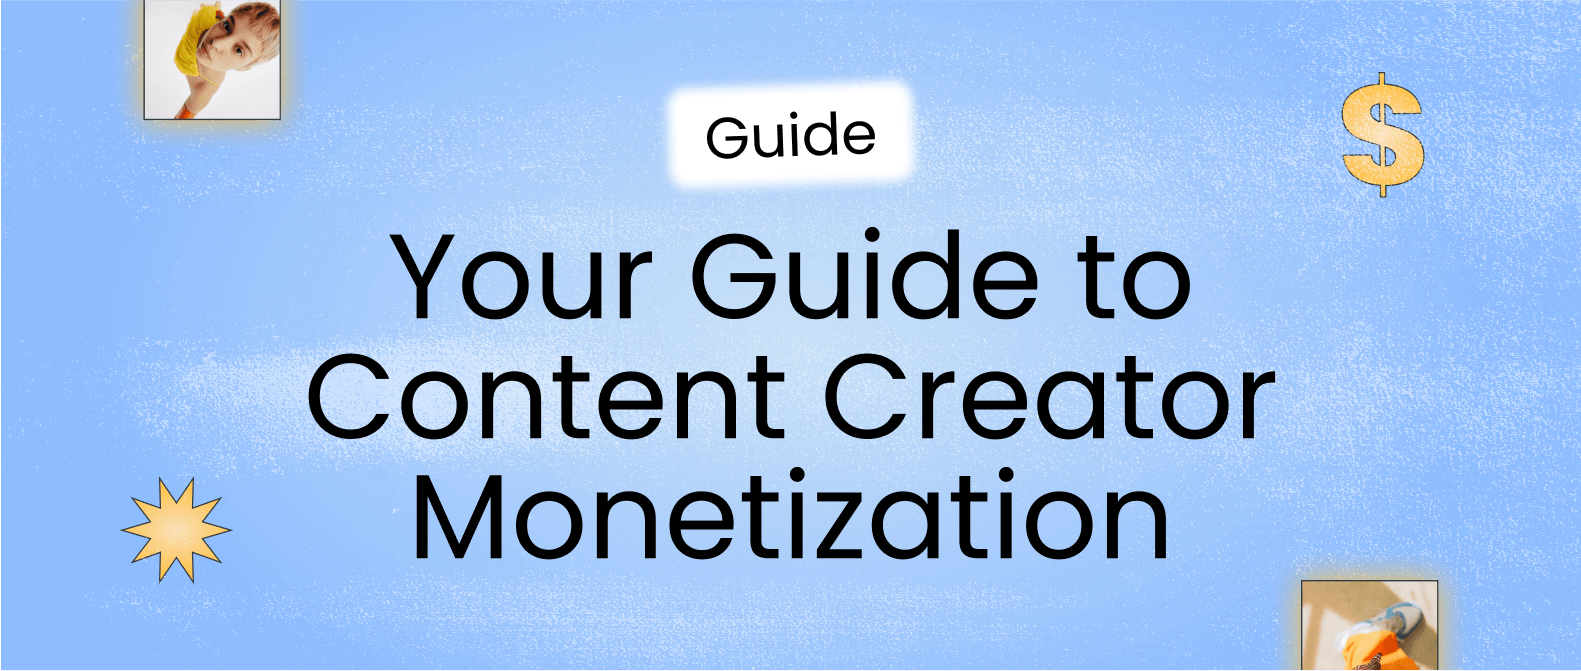 header image for later’s creator monetization guide